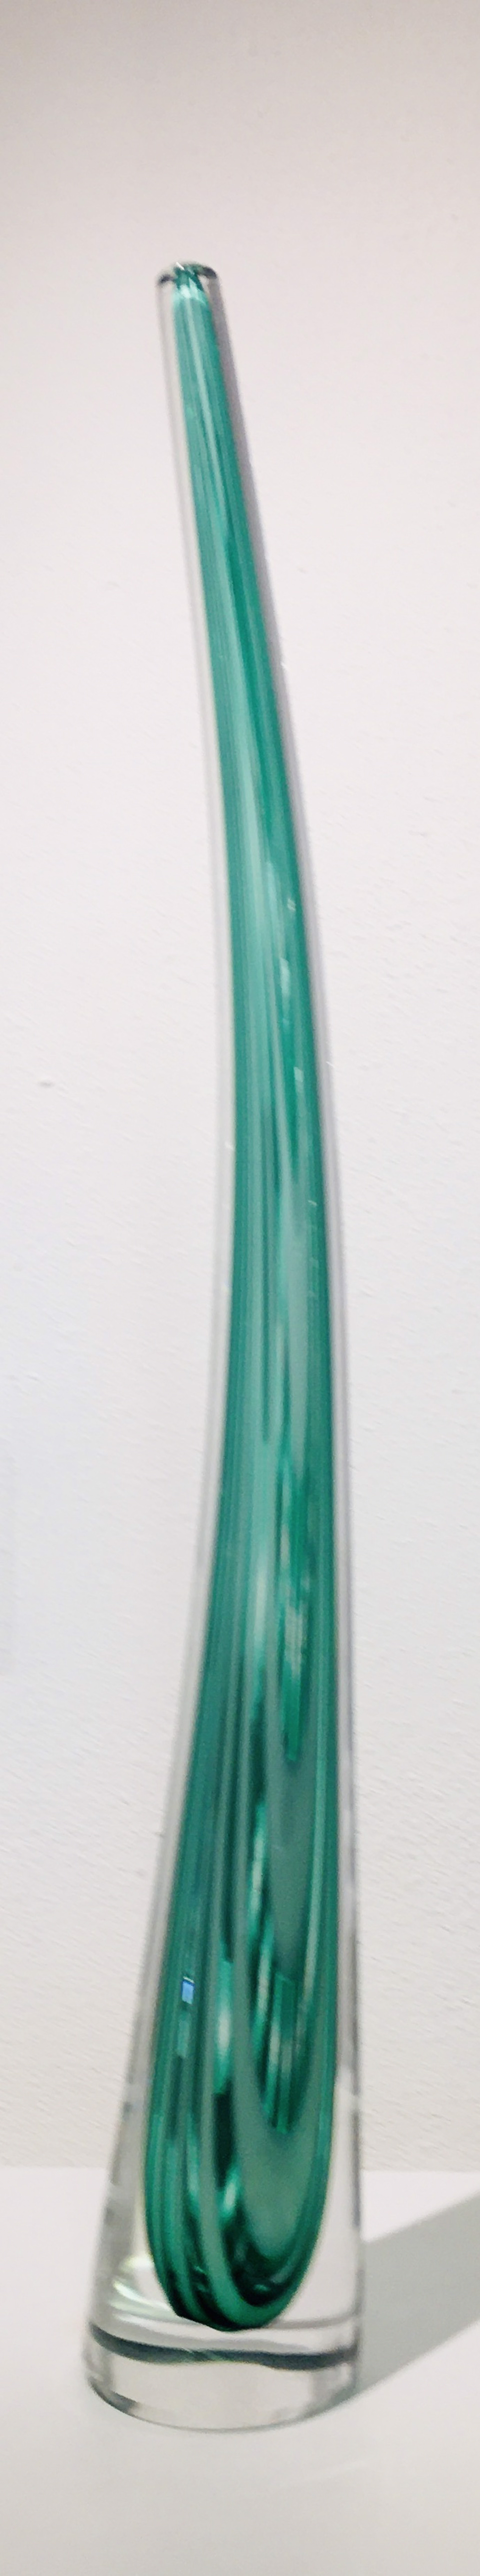 Green Tusk by NEW DAY GLASS